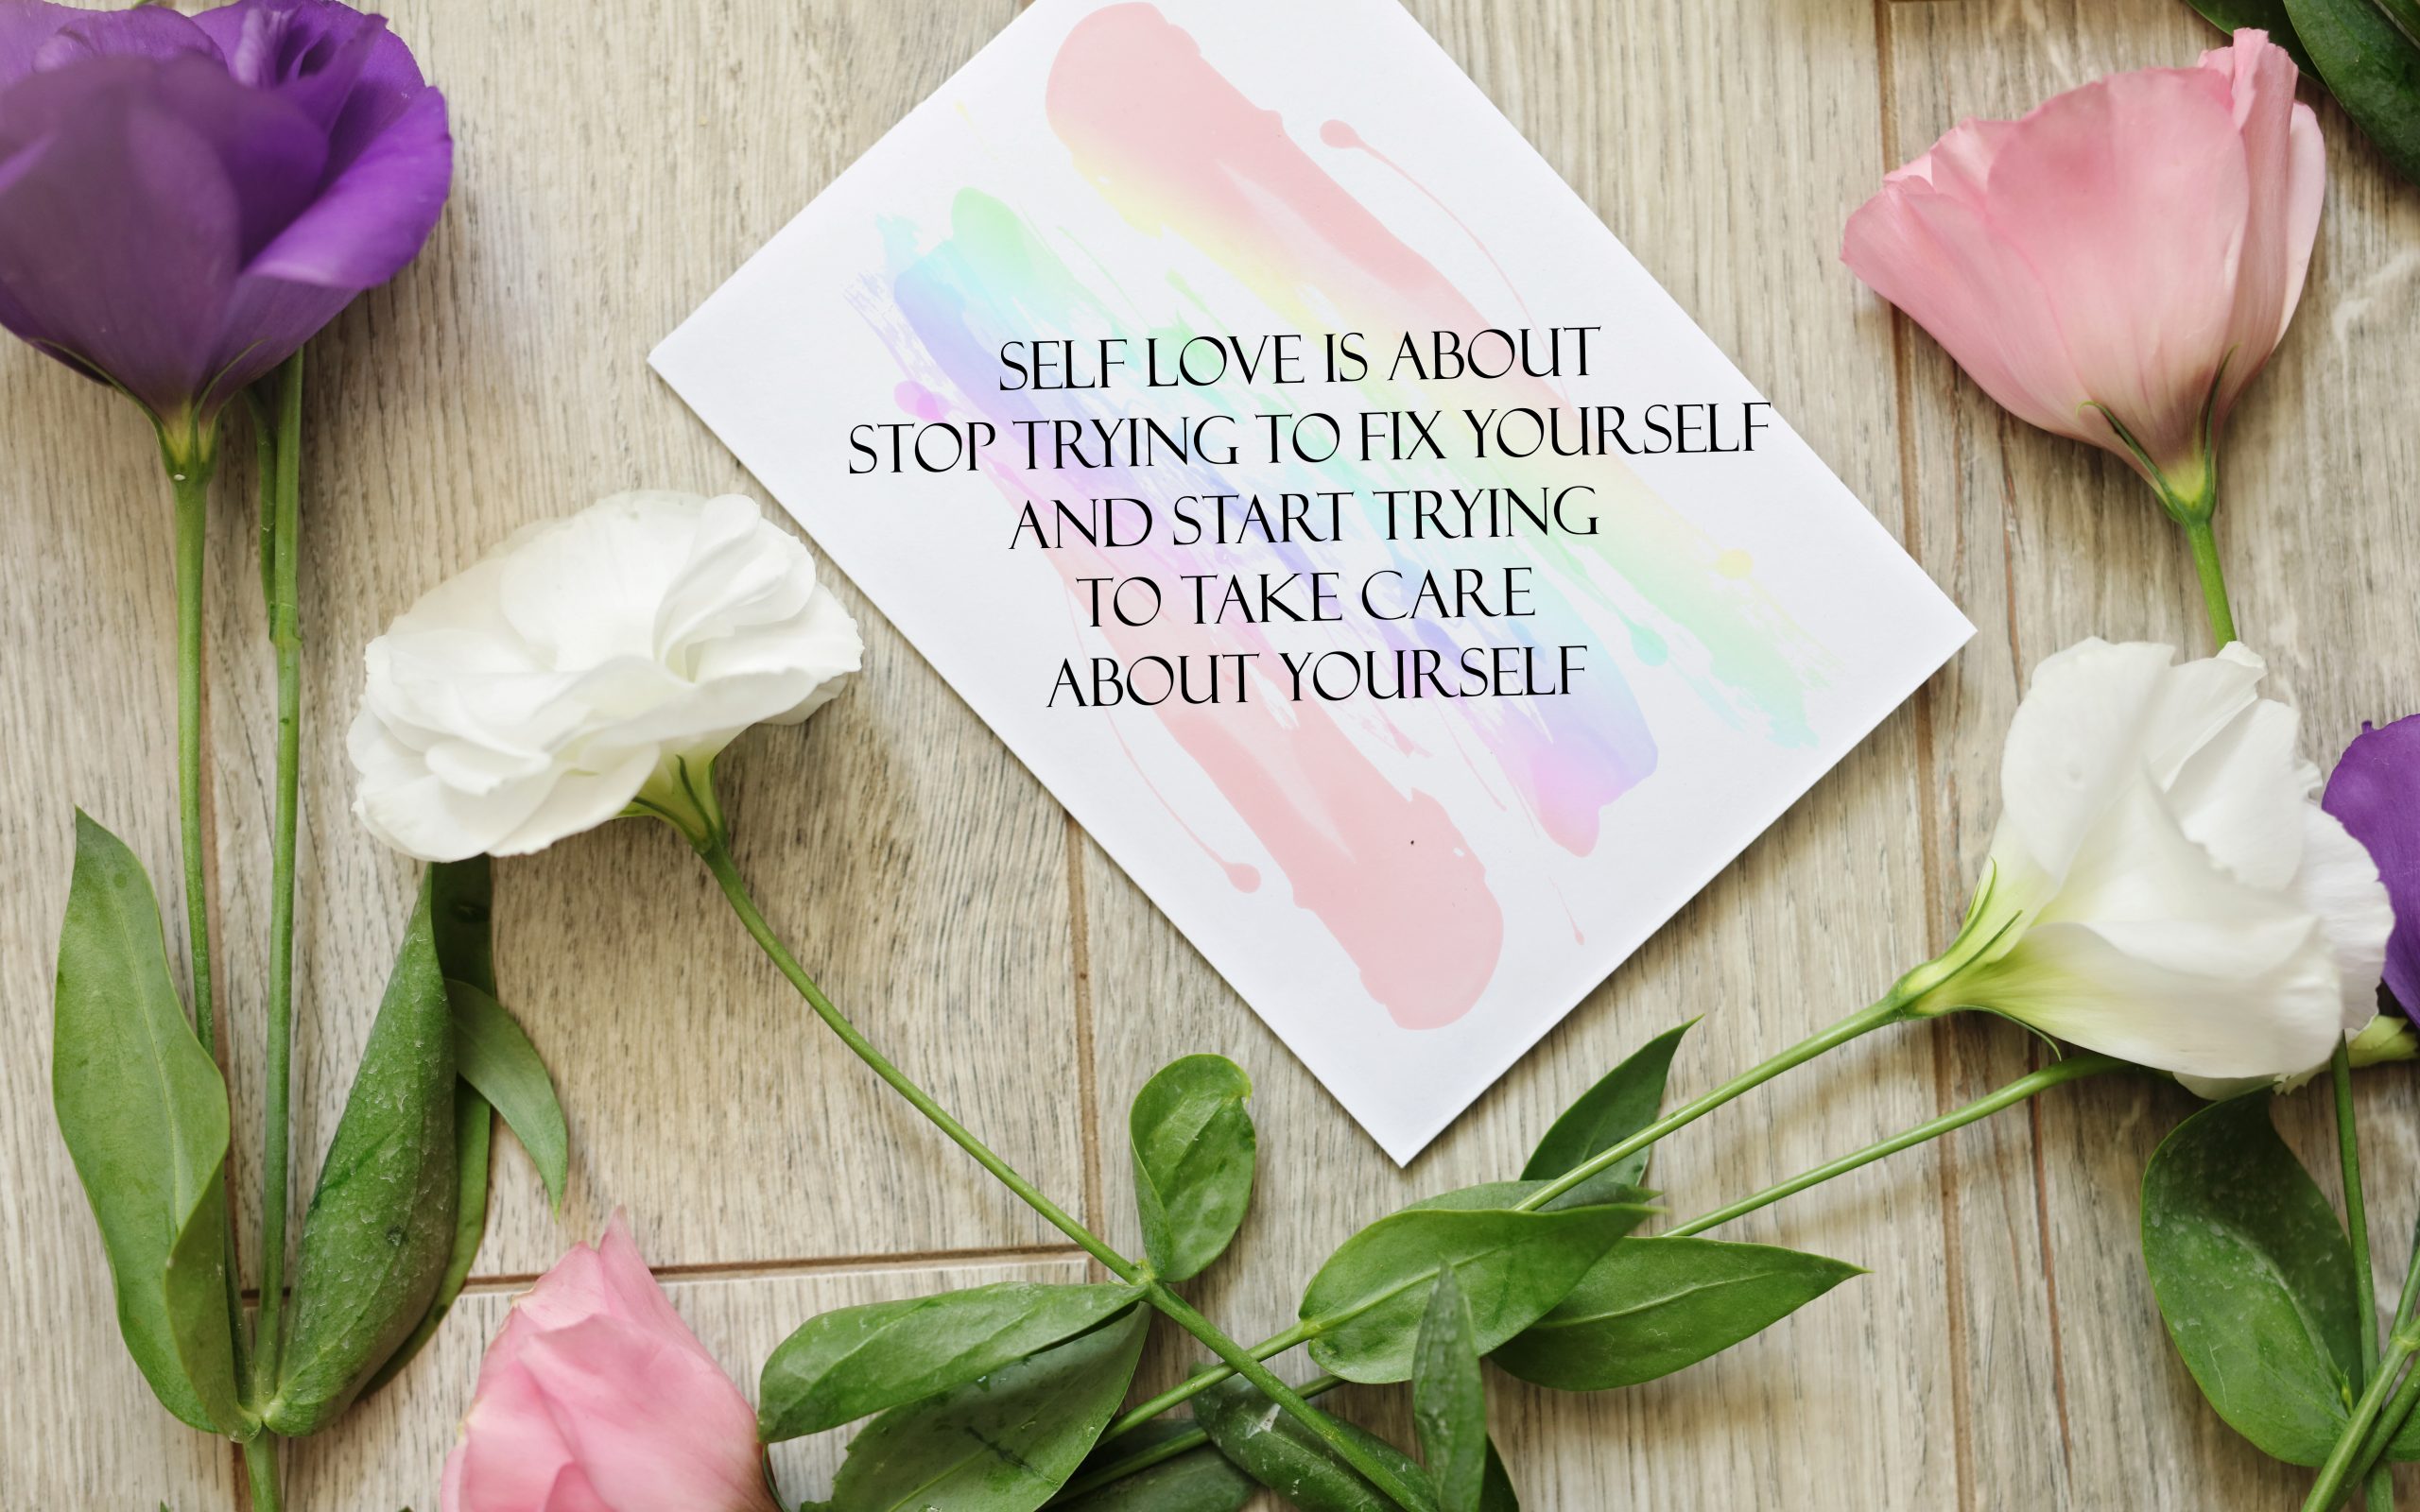 Inspiration Motivation quote for Woman Self love is about stop trying to fix yourself and start trying to take care about yourself